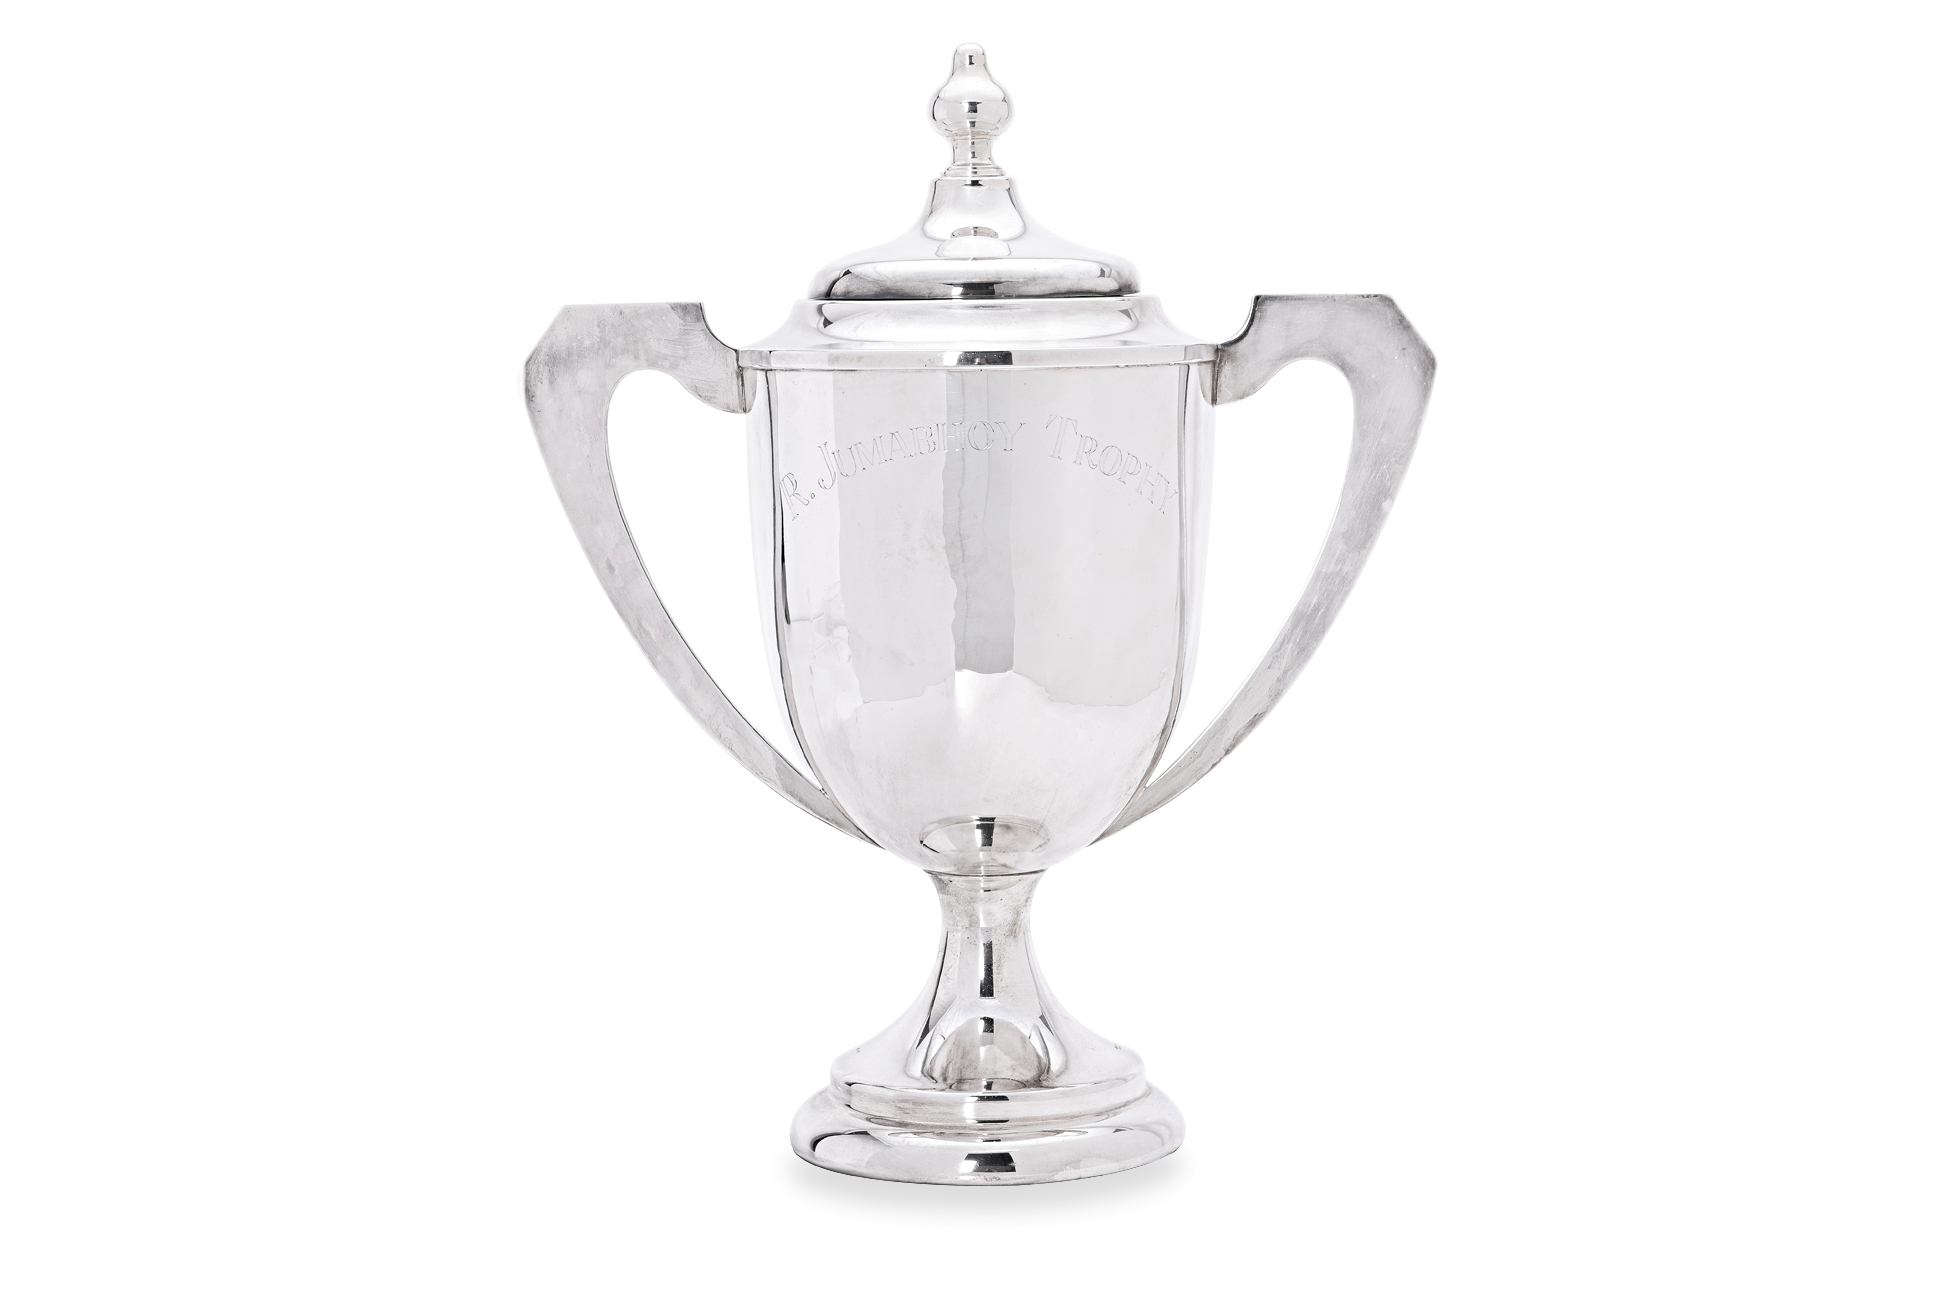 THE R. JUMABHOY TROPHY - A LARGE SILVER PLATED TROPHY CUP